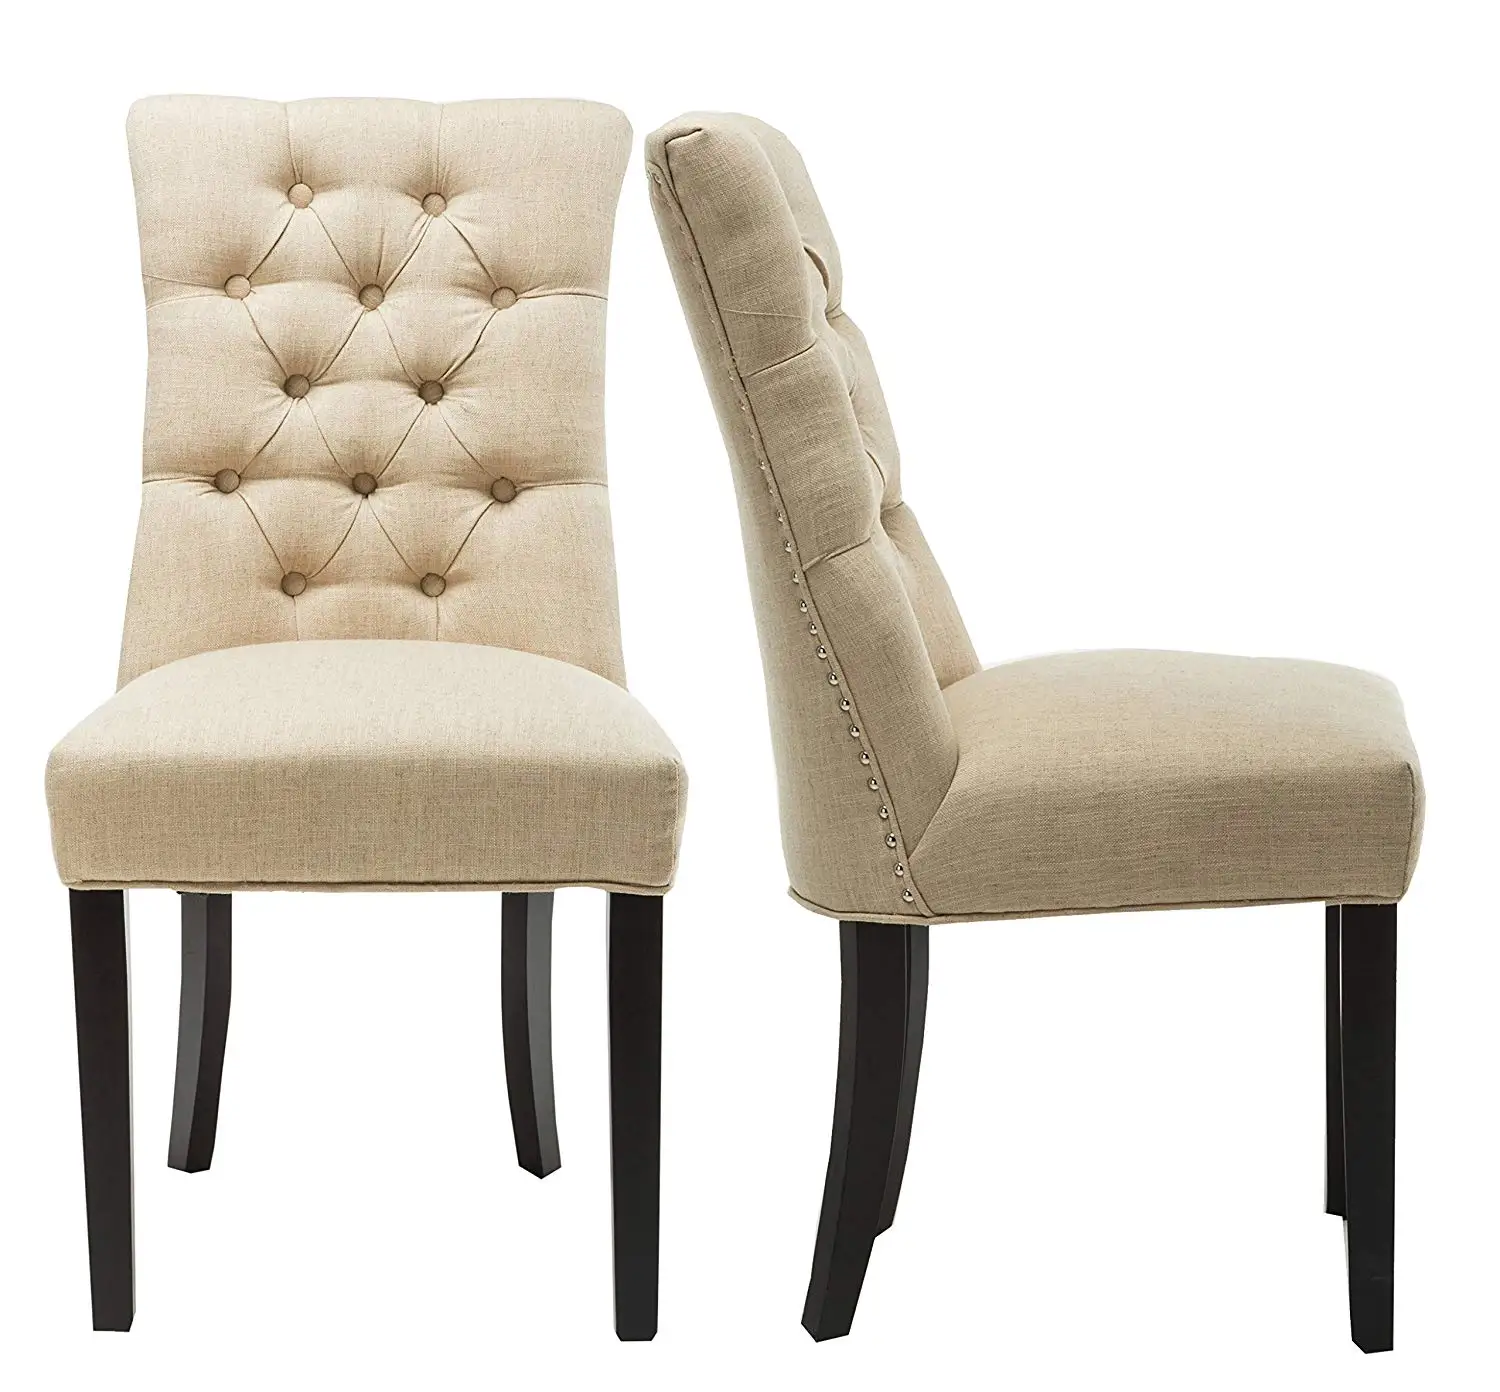 Buy Elegant Tufted Accent Dining Chairs Breathable Soft Fabric Sturdy